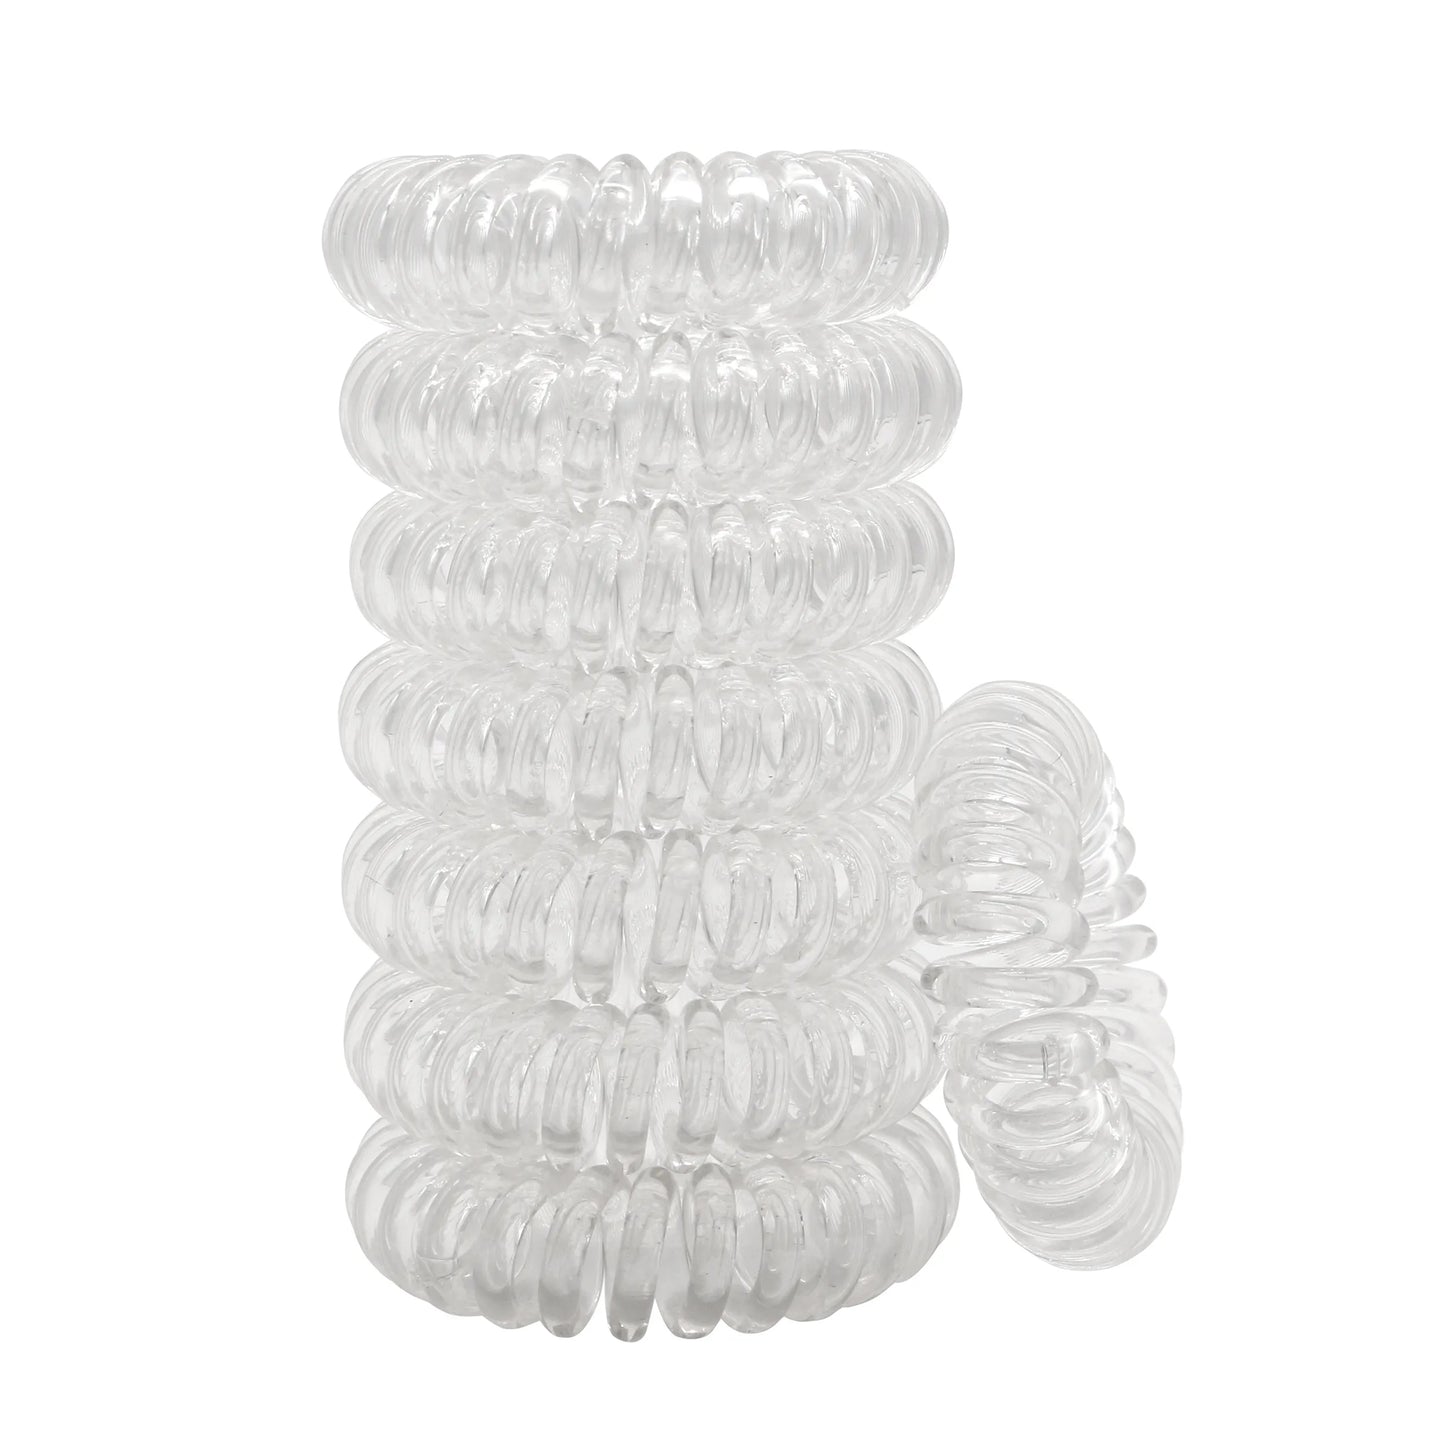 BSCI Audited Factory 3.5cm Mixed Colour 6pcs Plastic Telephone Cord Hair Tie coil tie Holder no damage for hair